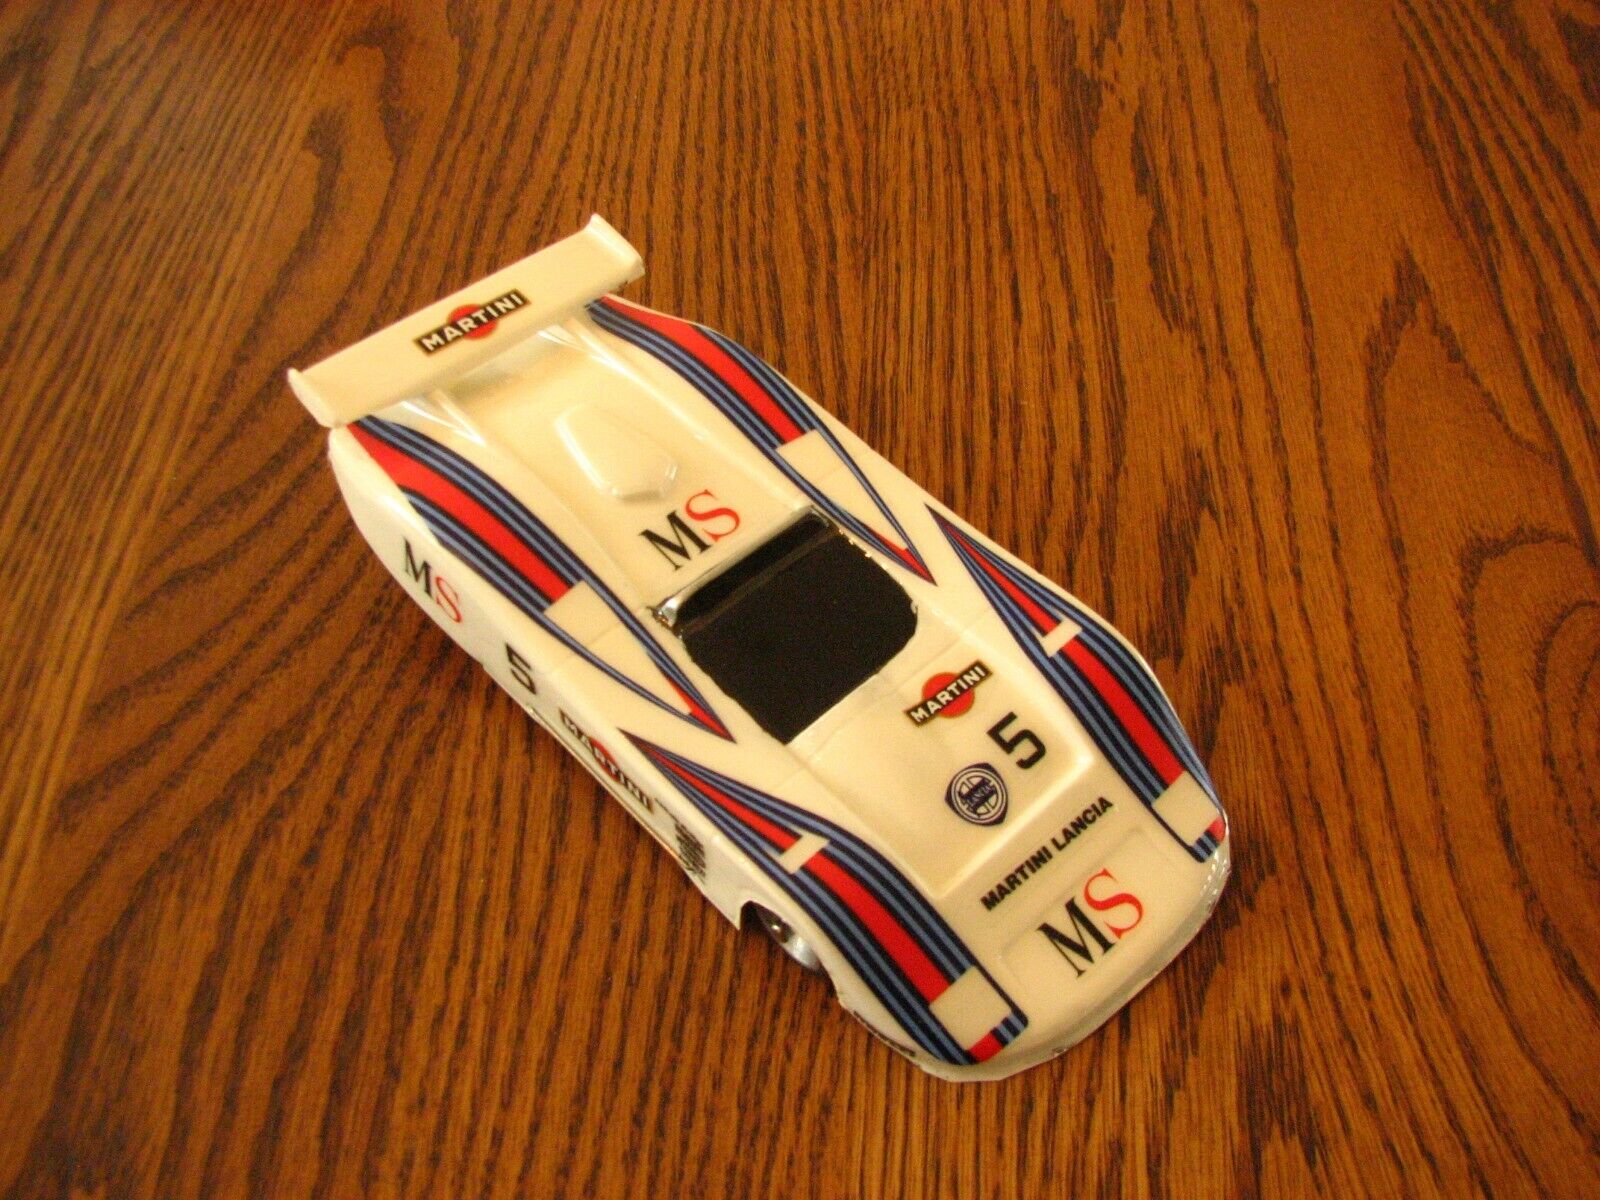 1 Max 35% OFF 64% OFF 32 custom Betta Lancia LC1 livery no.5 Martini on mounted Parm